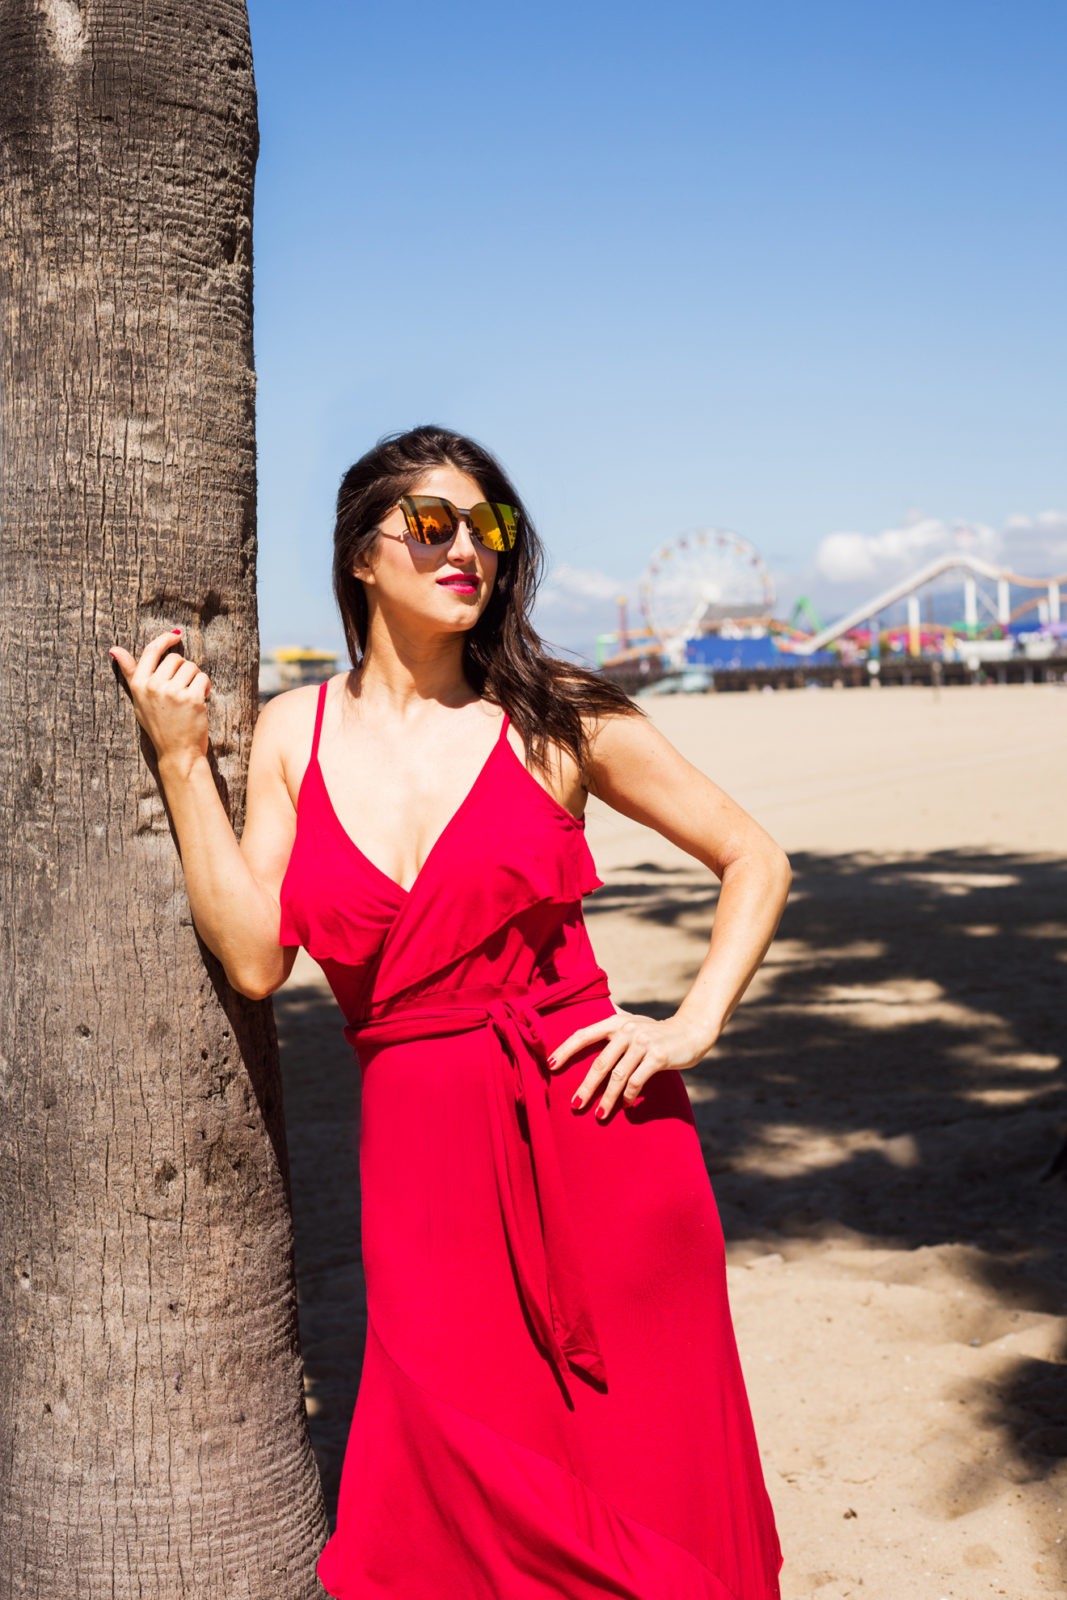 Cute Summer Dresses Under 50, Summer Fashion Trends Walmart We Dress America by popular Los Angeles Fashion Blogger Laura Lily: image of woman at the beach wearing red Walmart faux wrap front maxi dress , Walmart Prive Revaux sunglasses and Eliza May woven blue stripe tote.